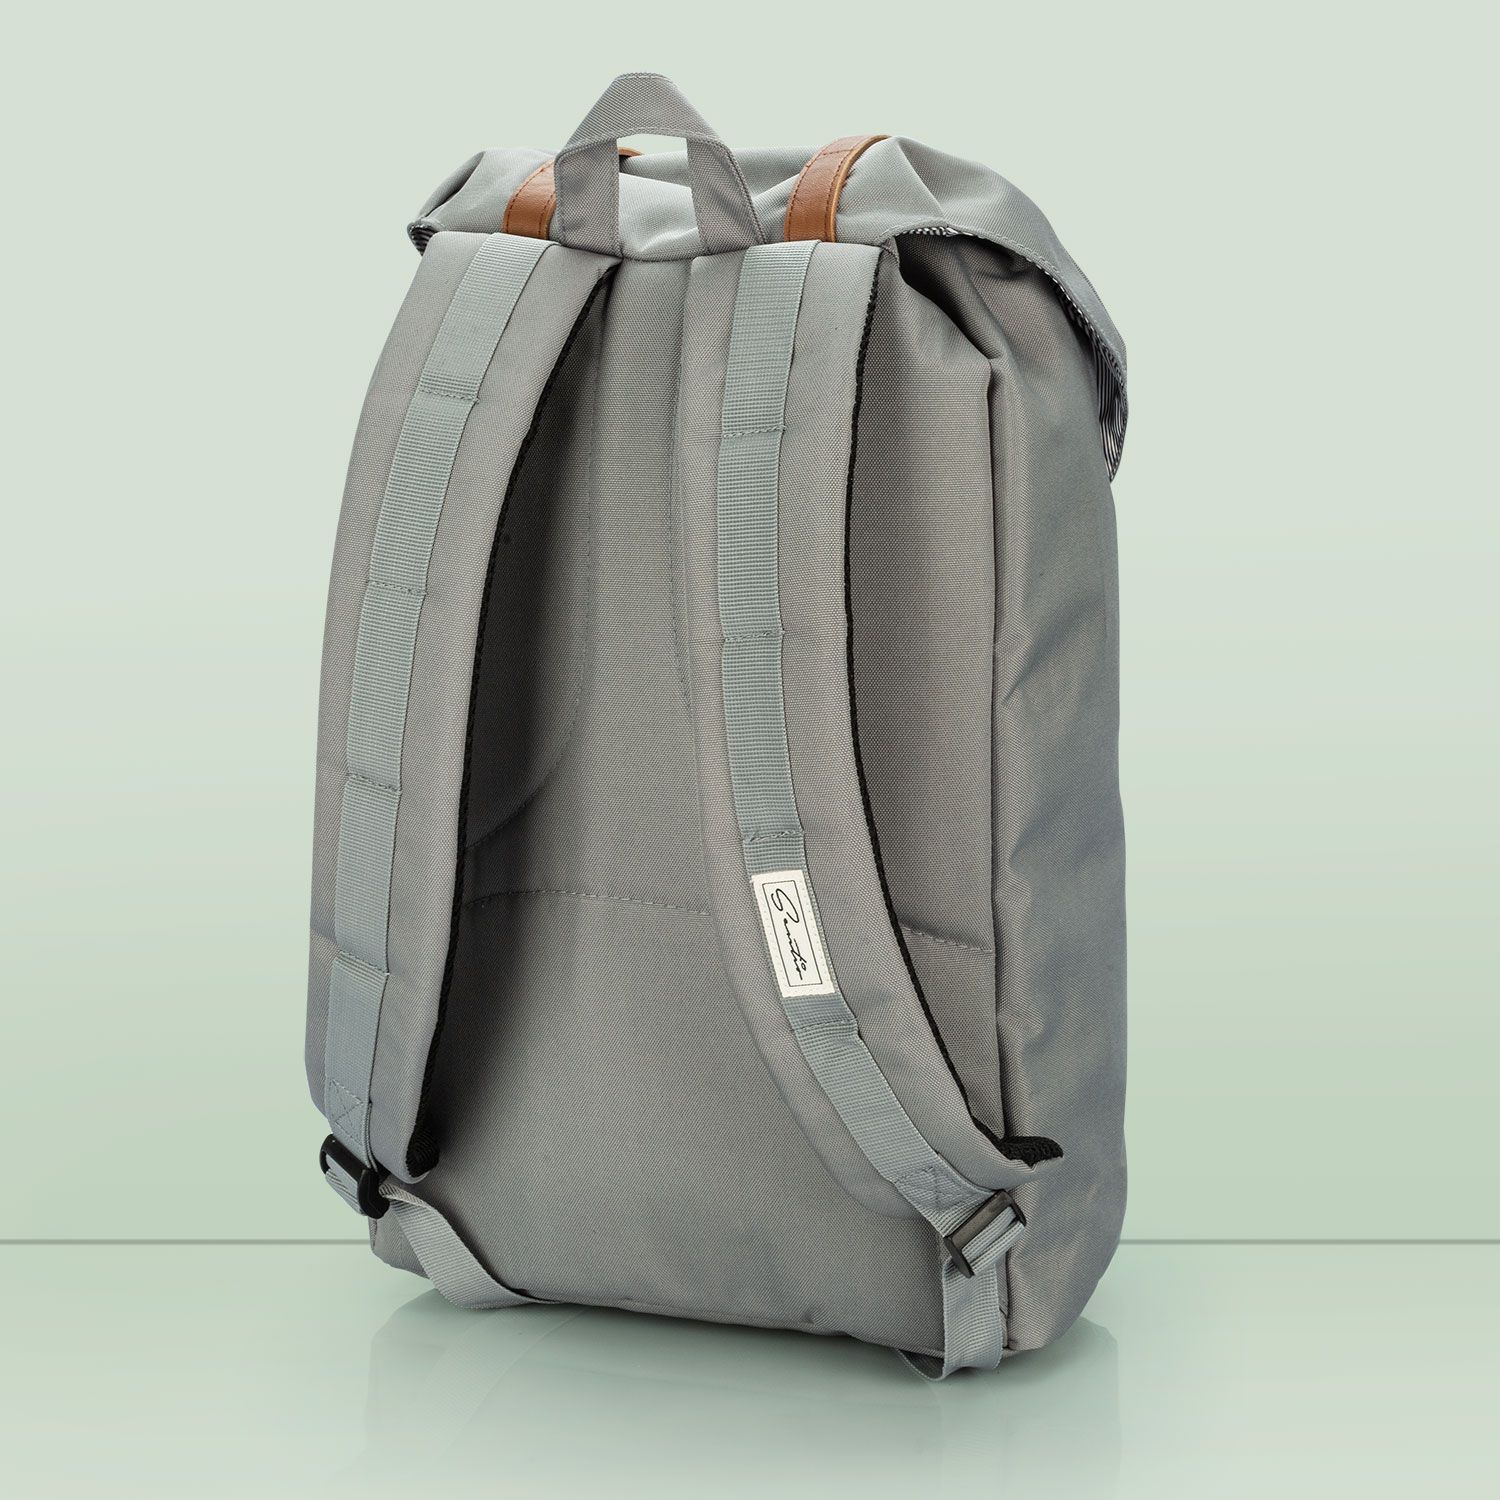 Rodeo select Greeting Sentio Backpacks | Plaisio.gr